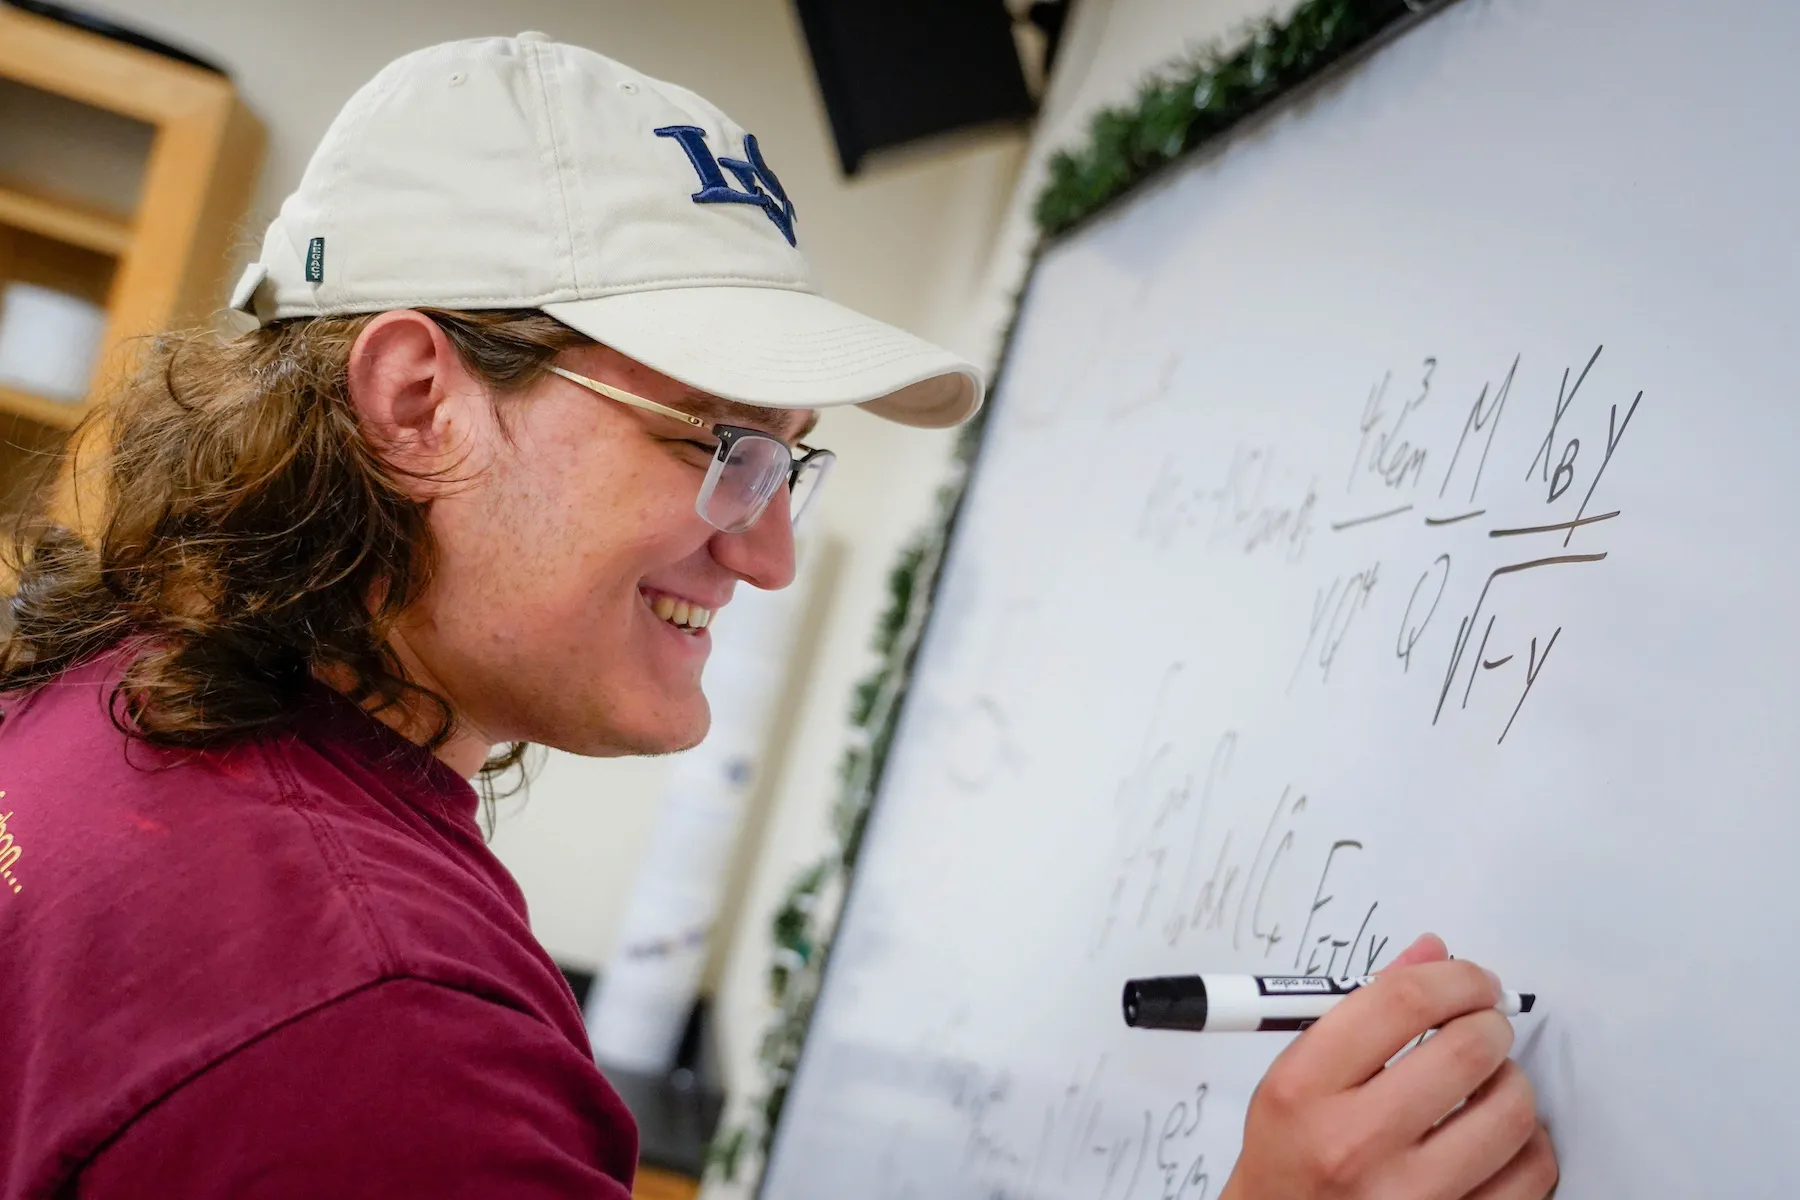 Student writes on board during physics summer research over summer